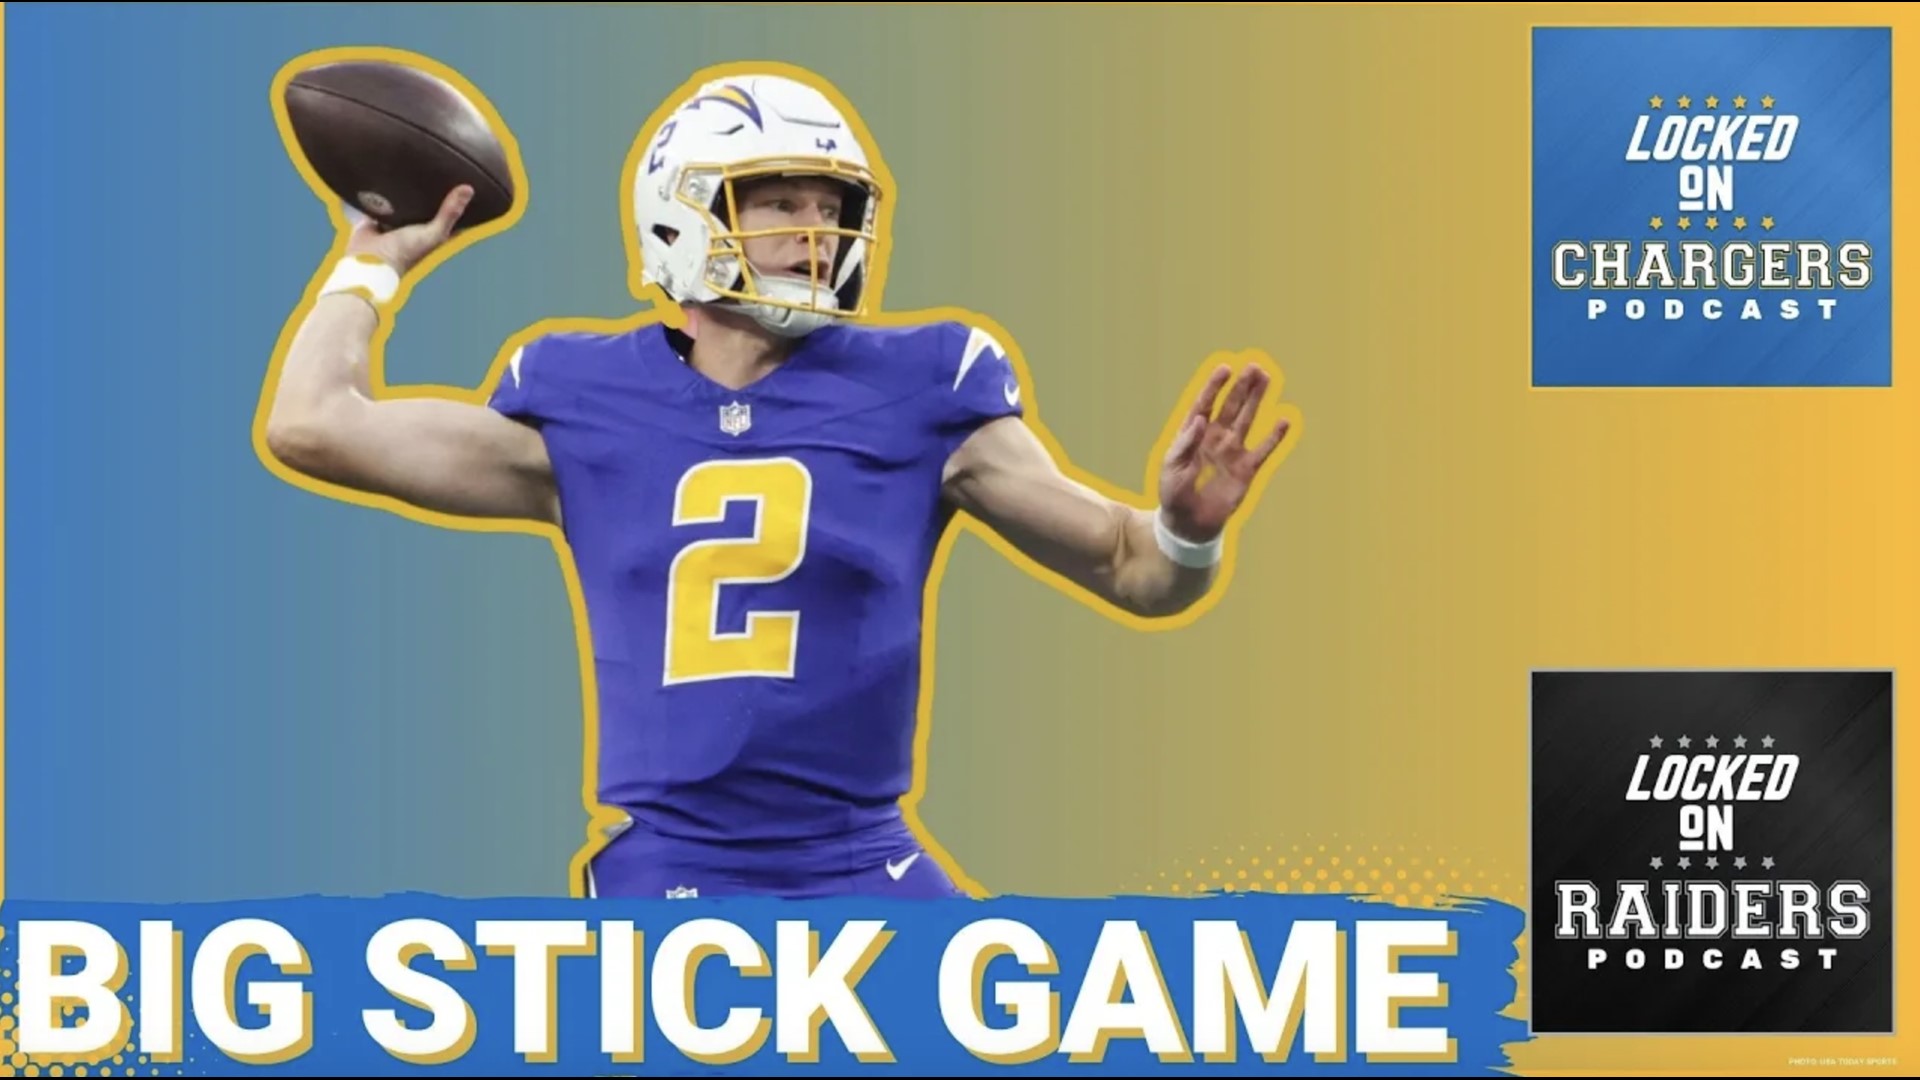 It's Easton Stick time for the Chargers, and he gets his first start against the hated Raiders. Las Vegas Coach Antonio Pearce is trying to prove he should stay